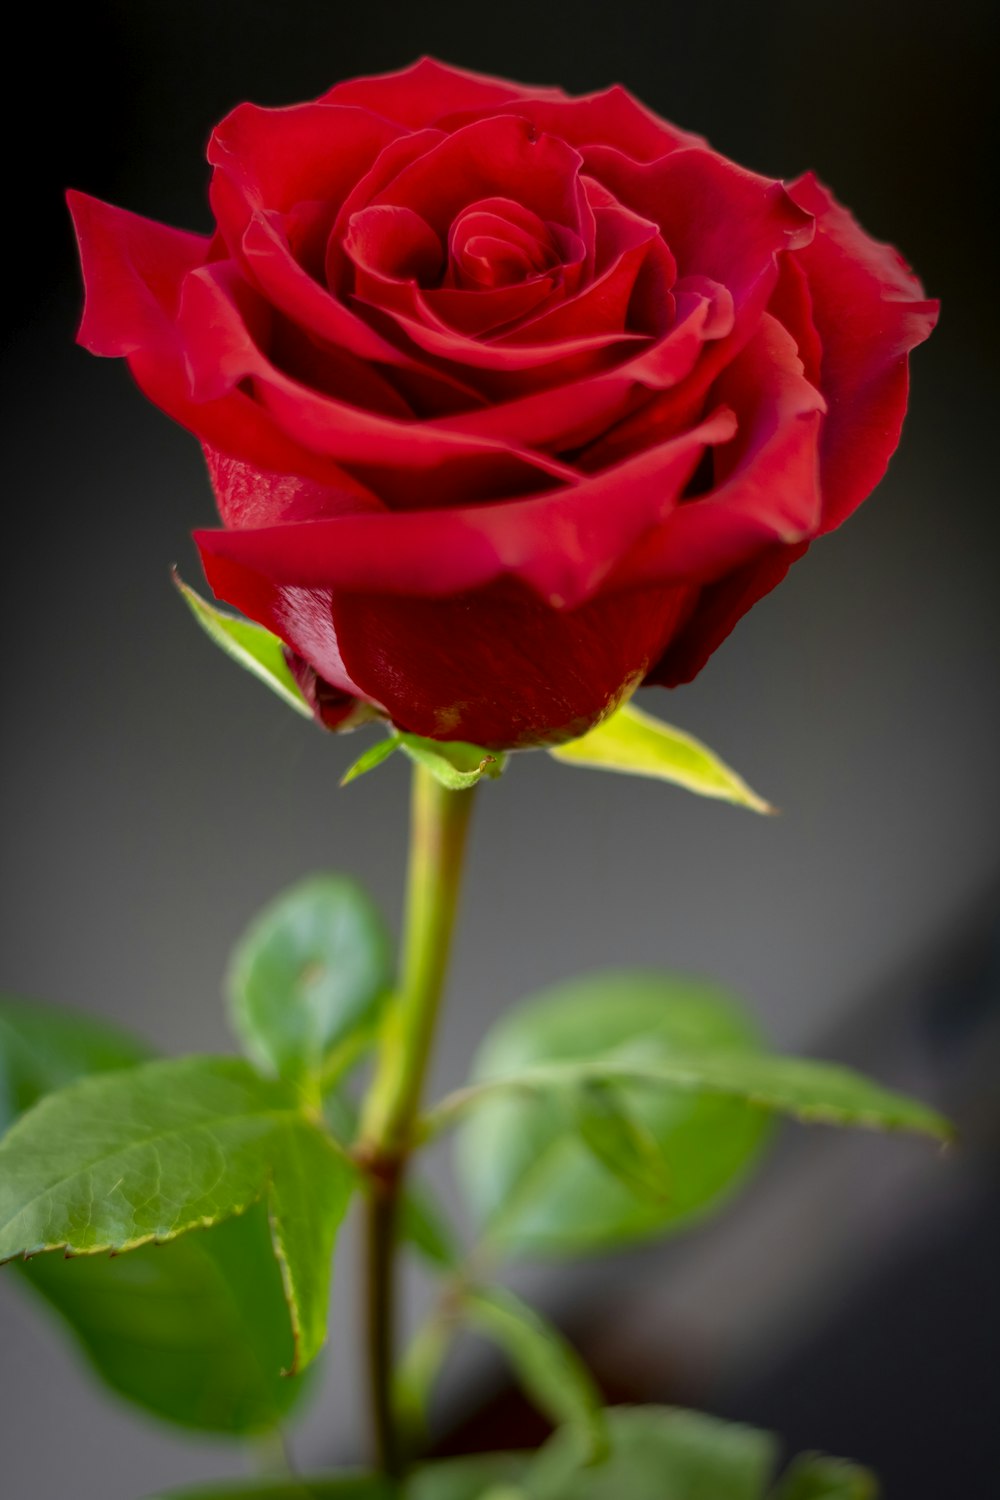 350+ Red-Rose Images [HQ] | Download Free Pictures on Unsplash